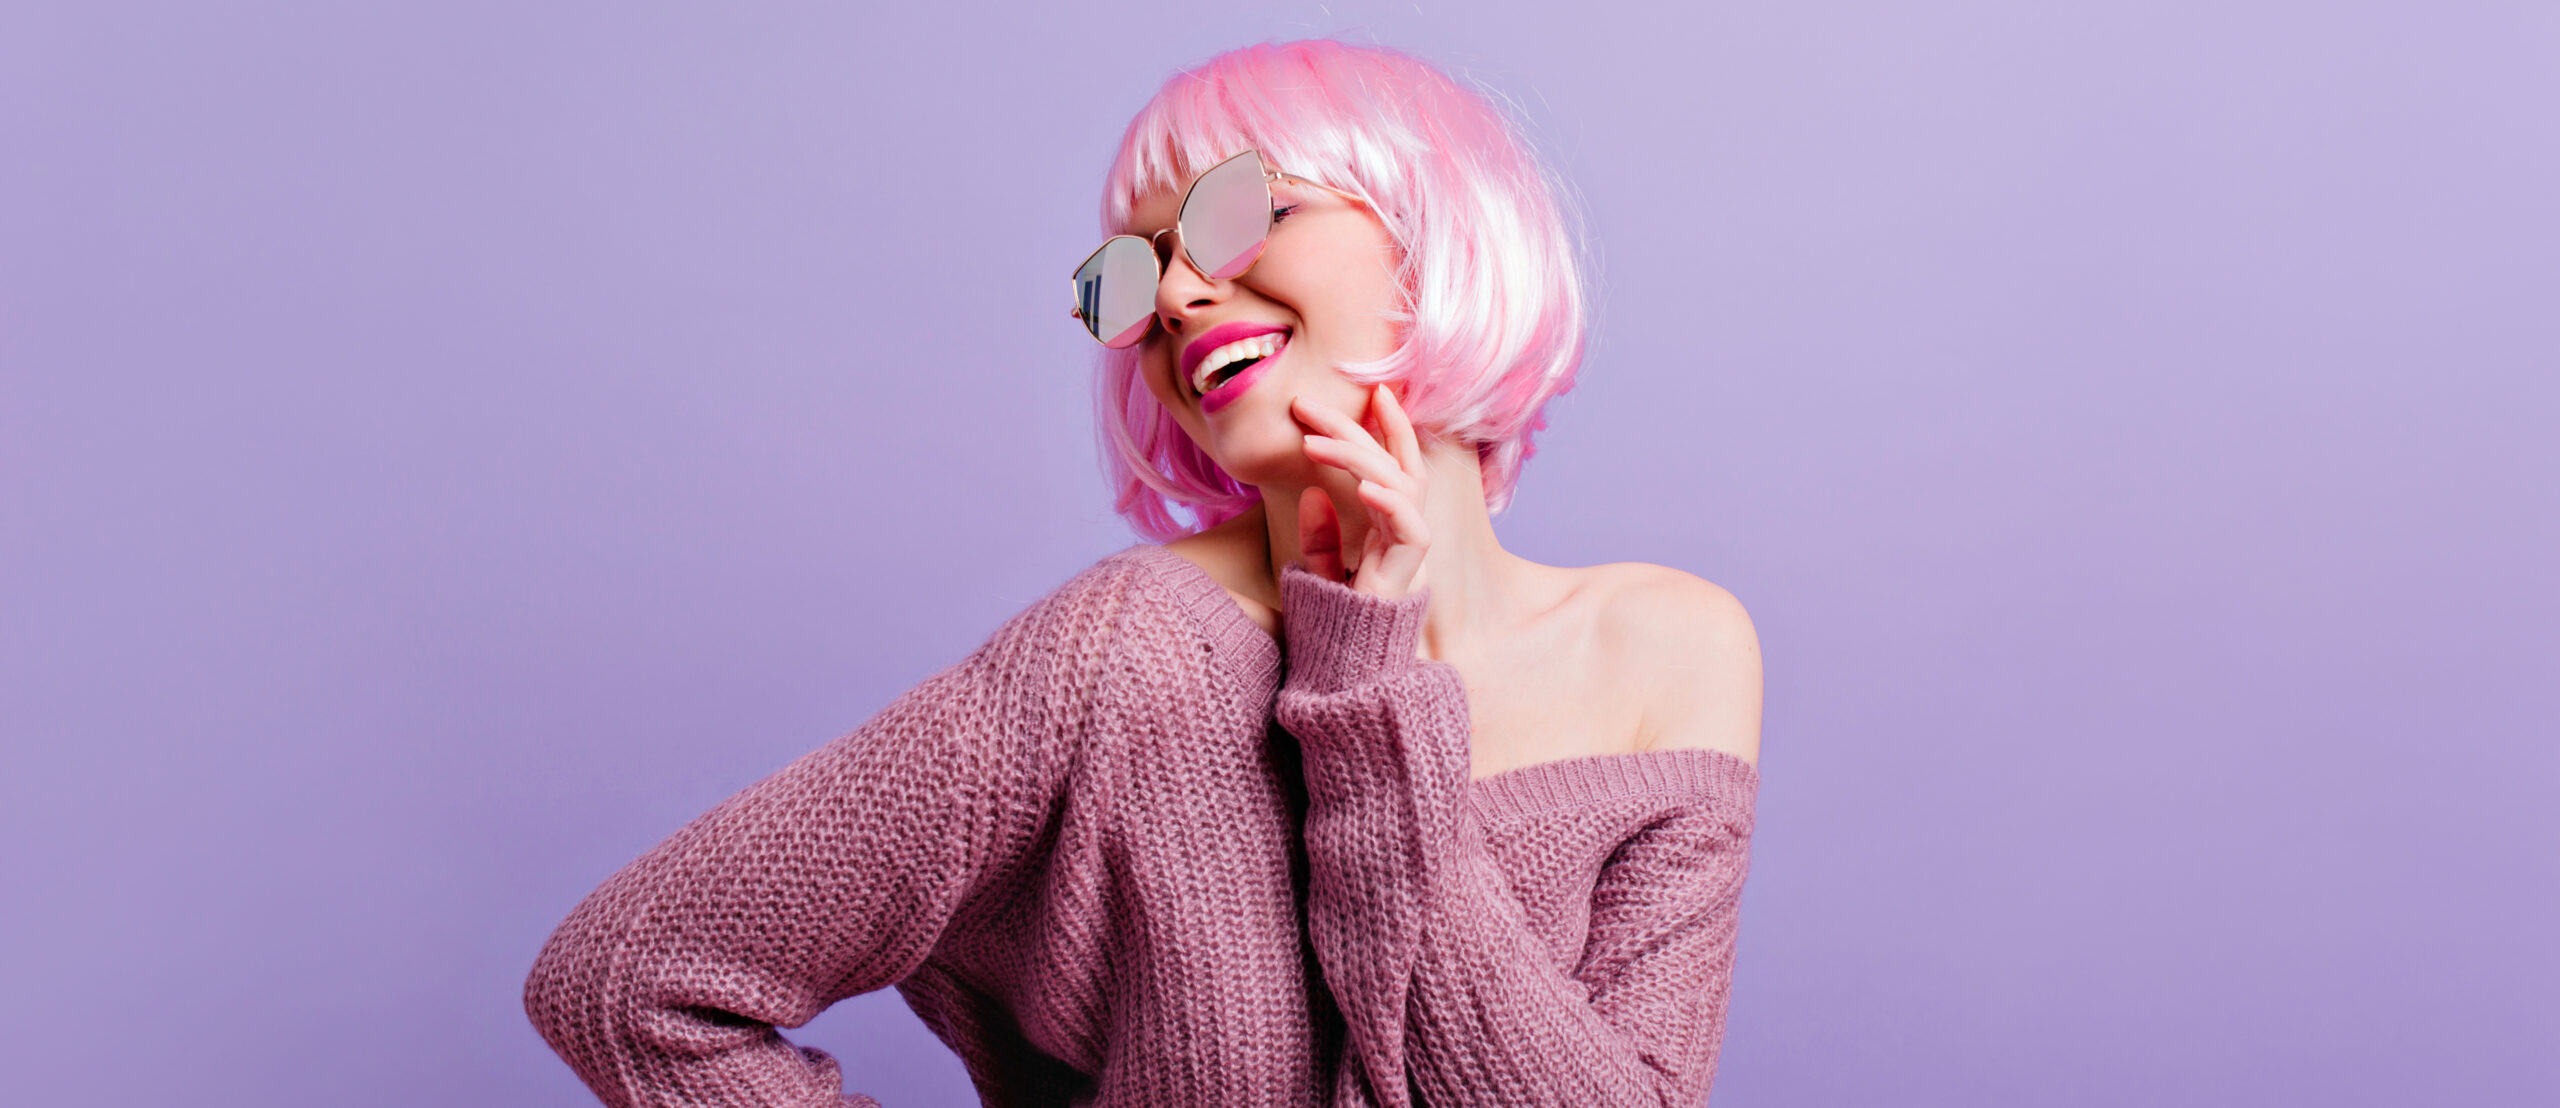 Pleased young girl in periwig and sunglasses having fun in studio. Photo of wonderful female model with pink hair smiling while dancing on purple background.